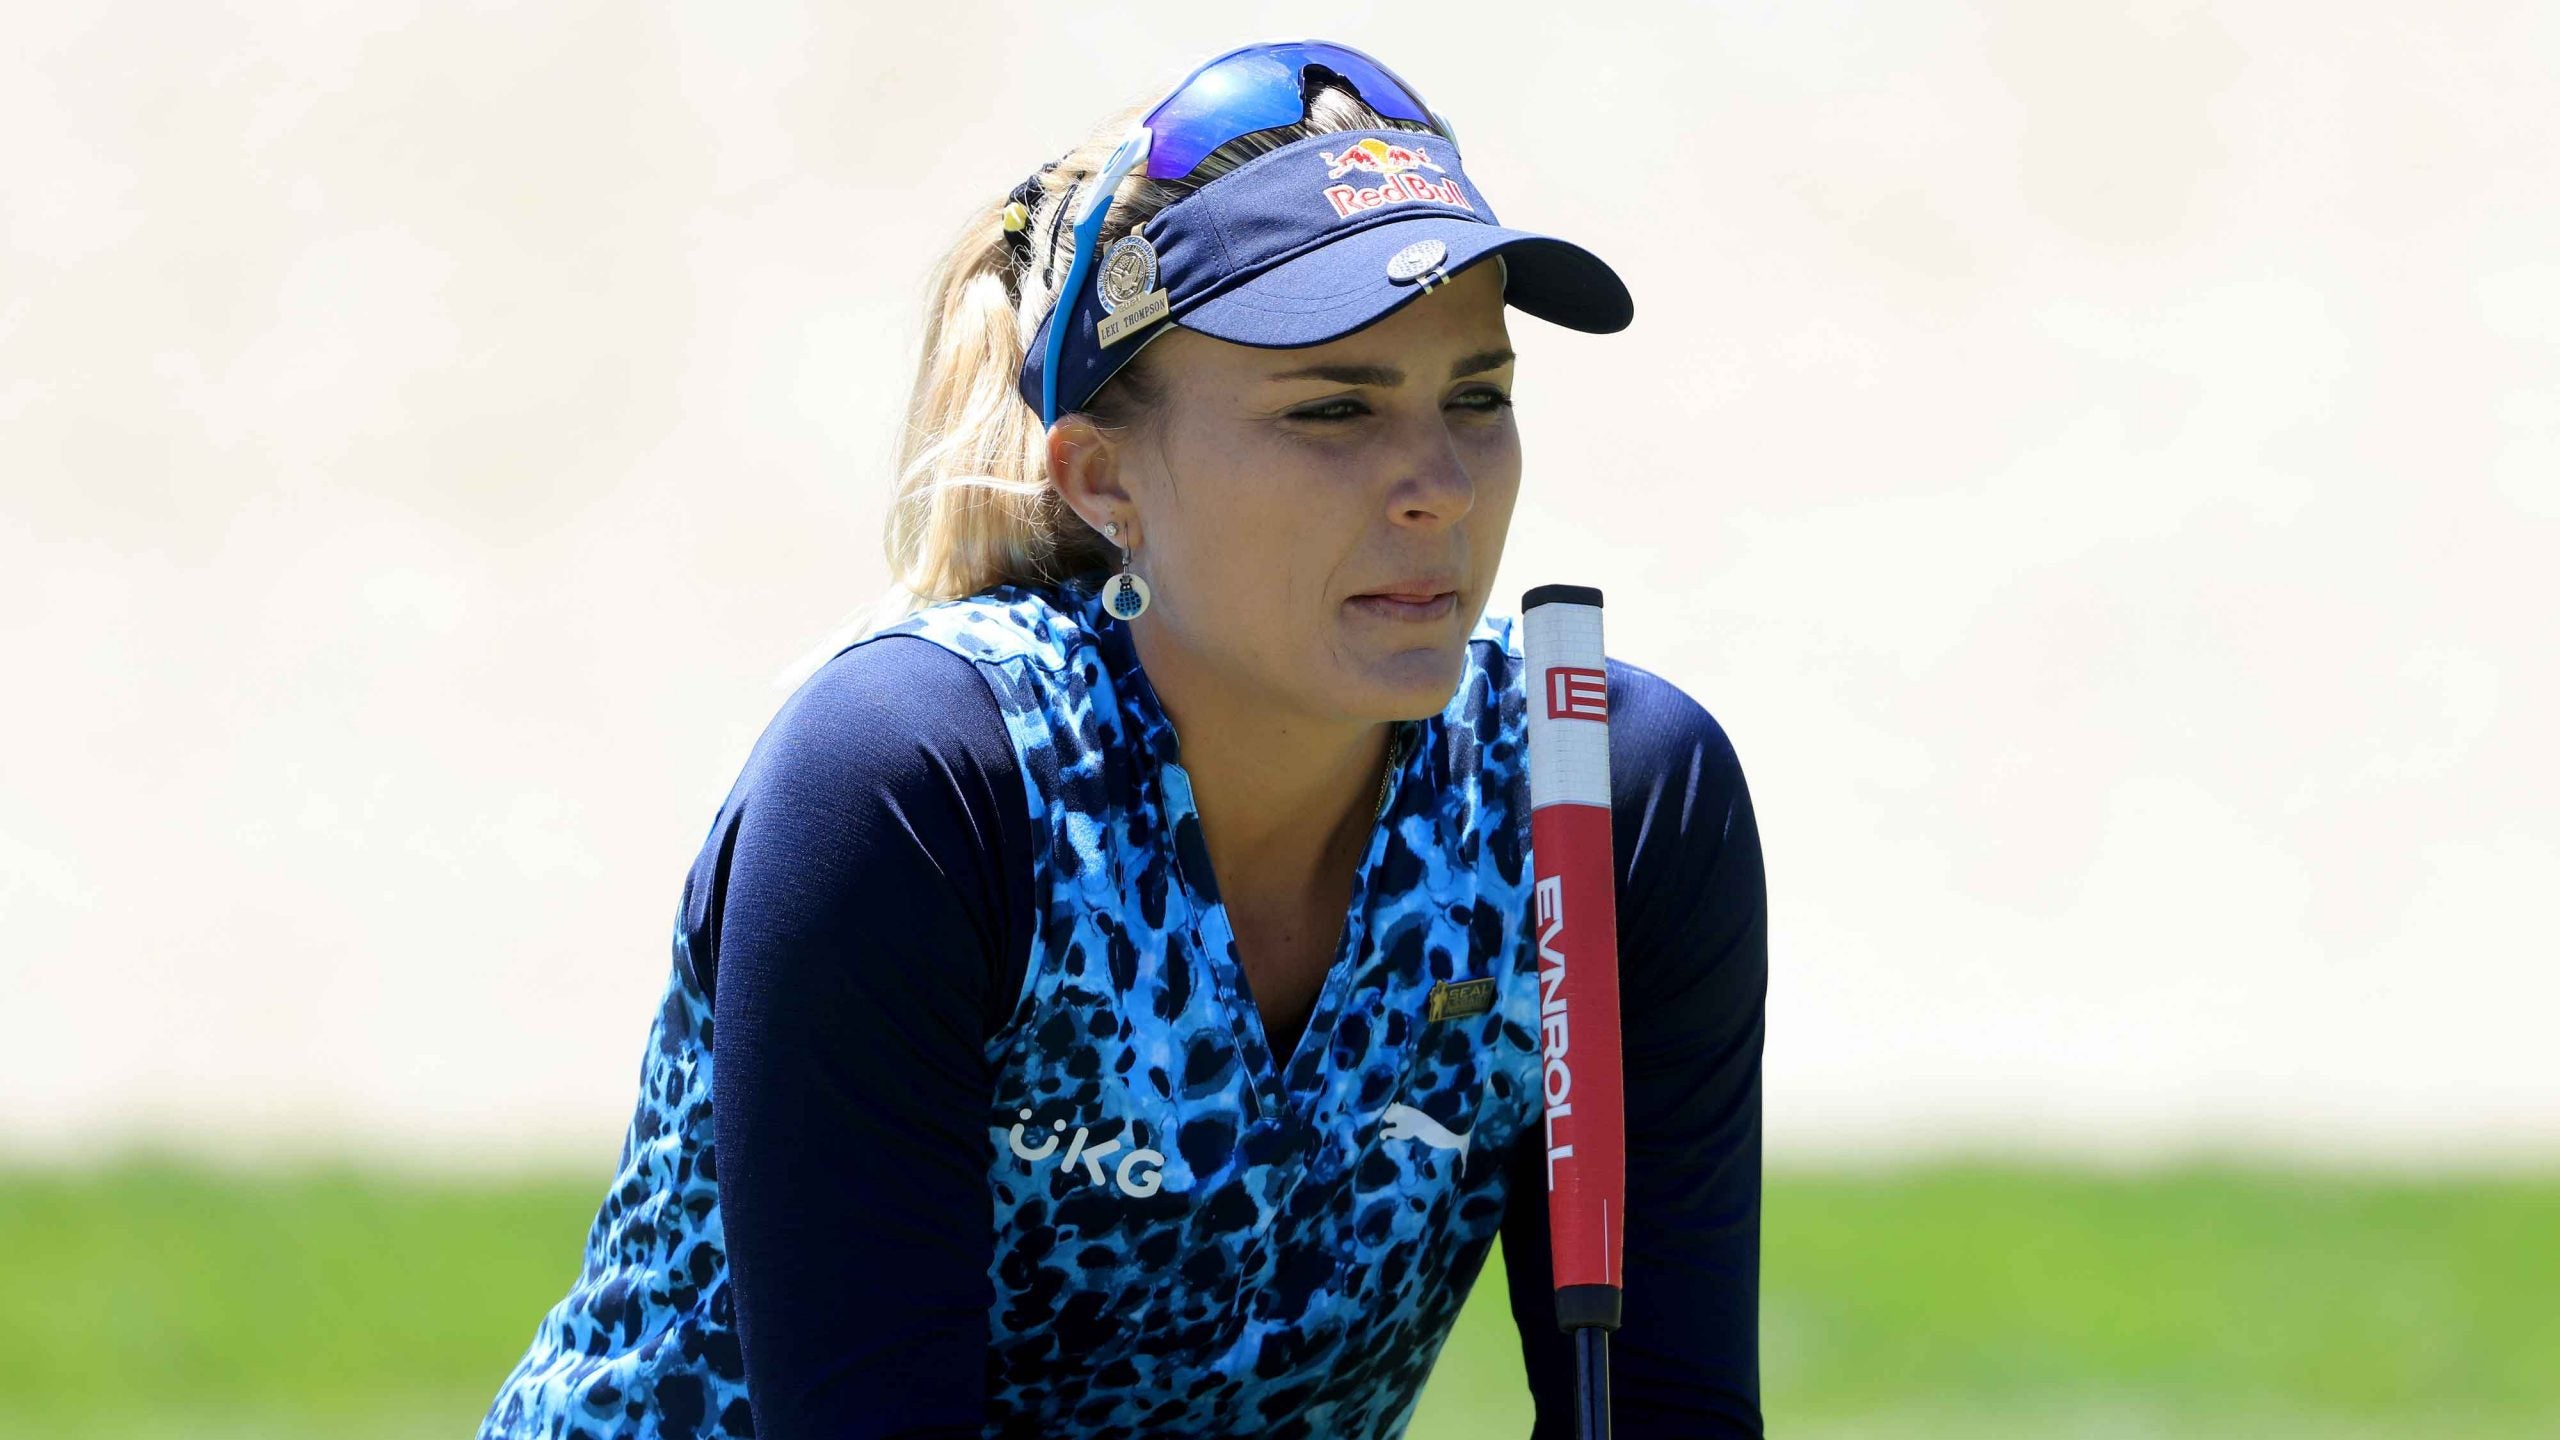 Pictures of lexi thompson